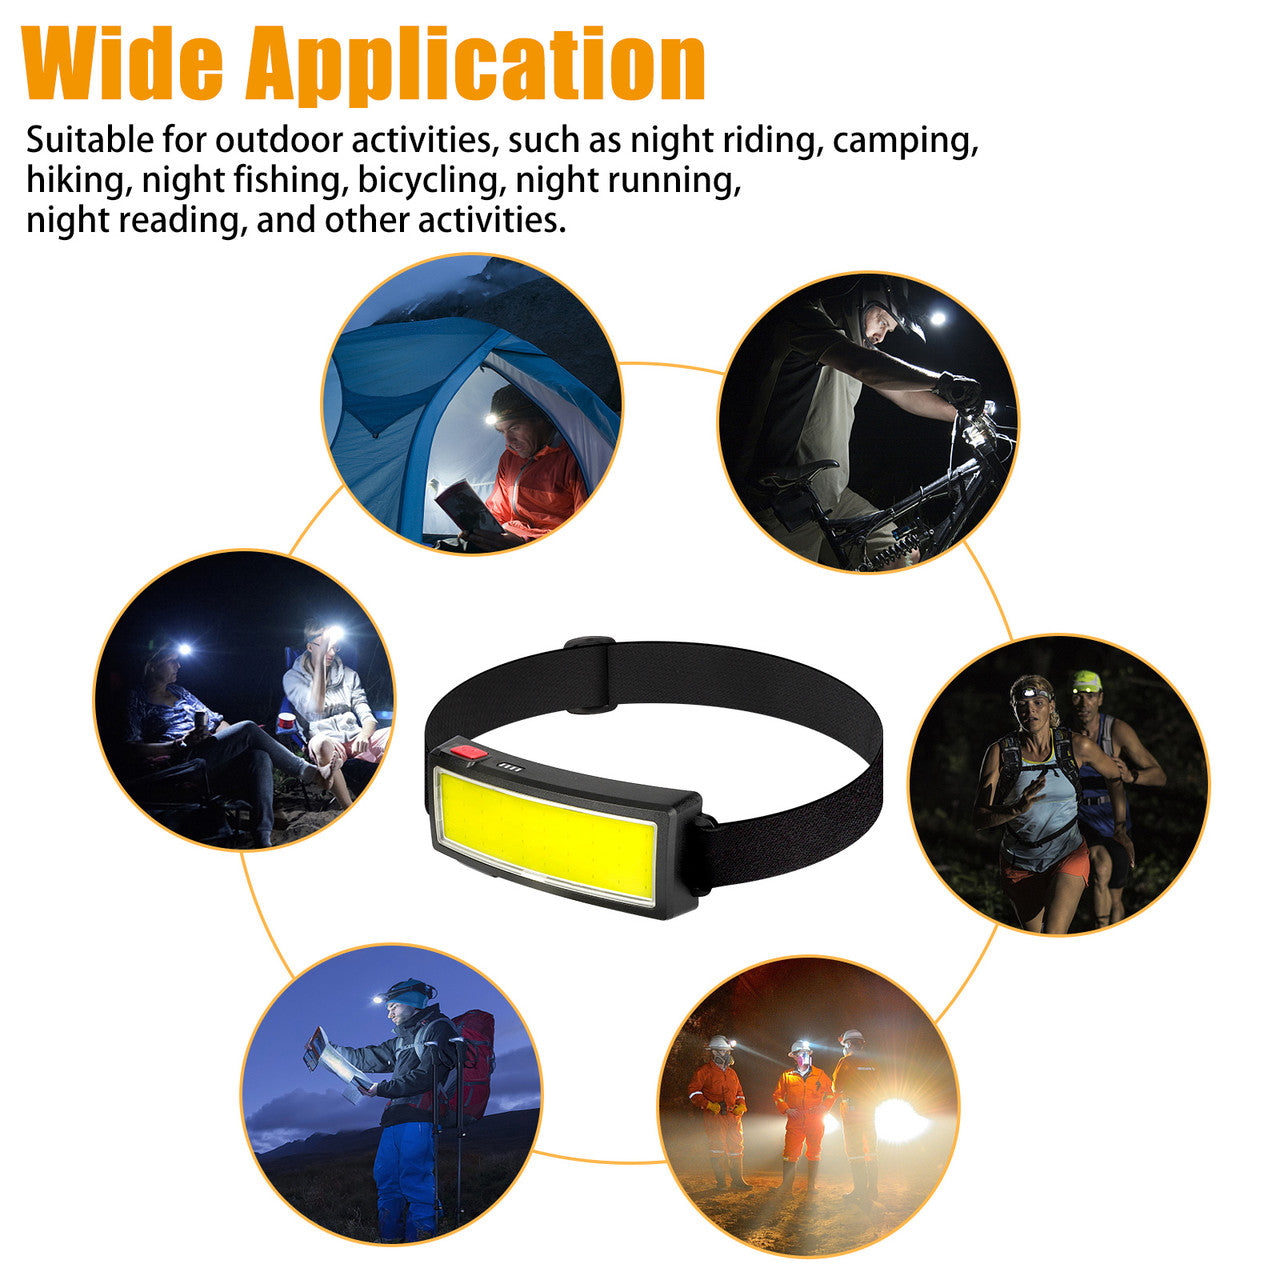 USB Rechargeable COB Light Waterproof Headlight 3 Modes, Built-in Battery for Outdoor Camping Hiking